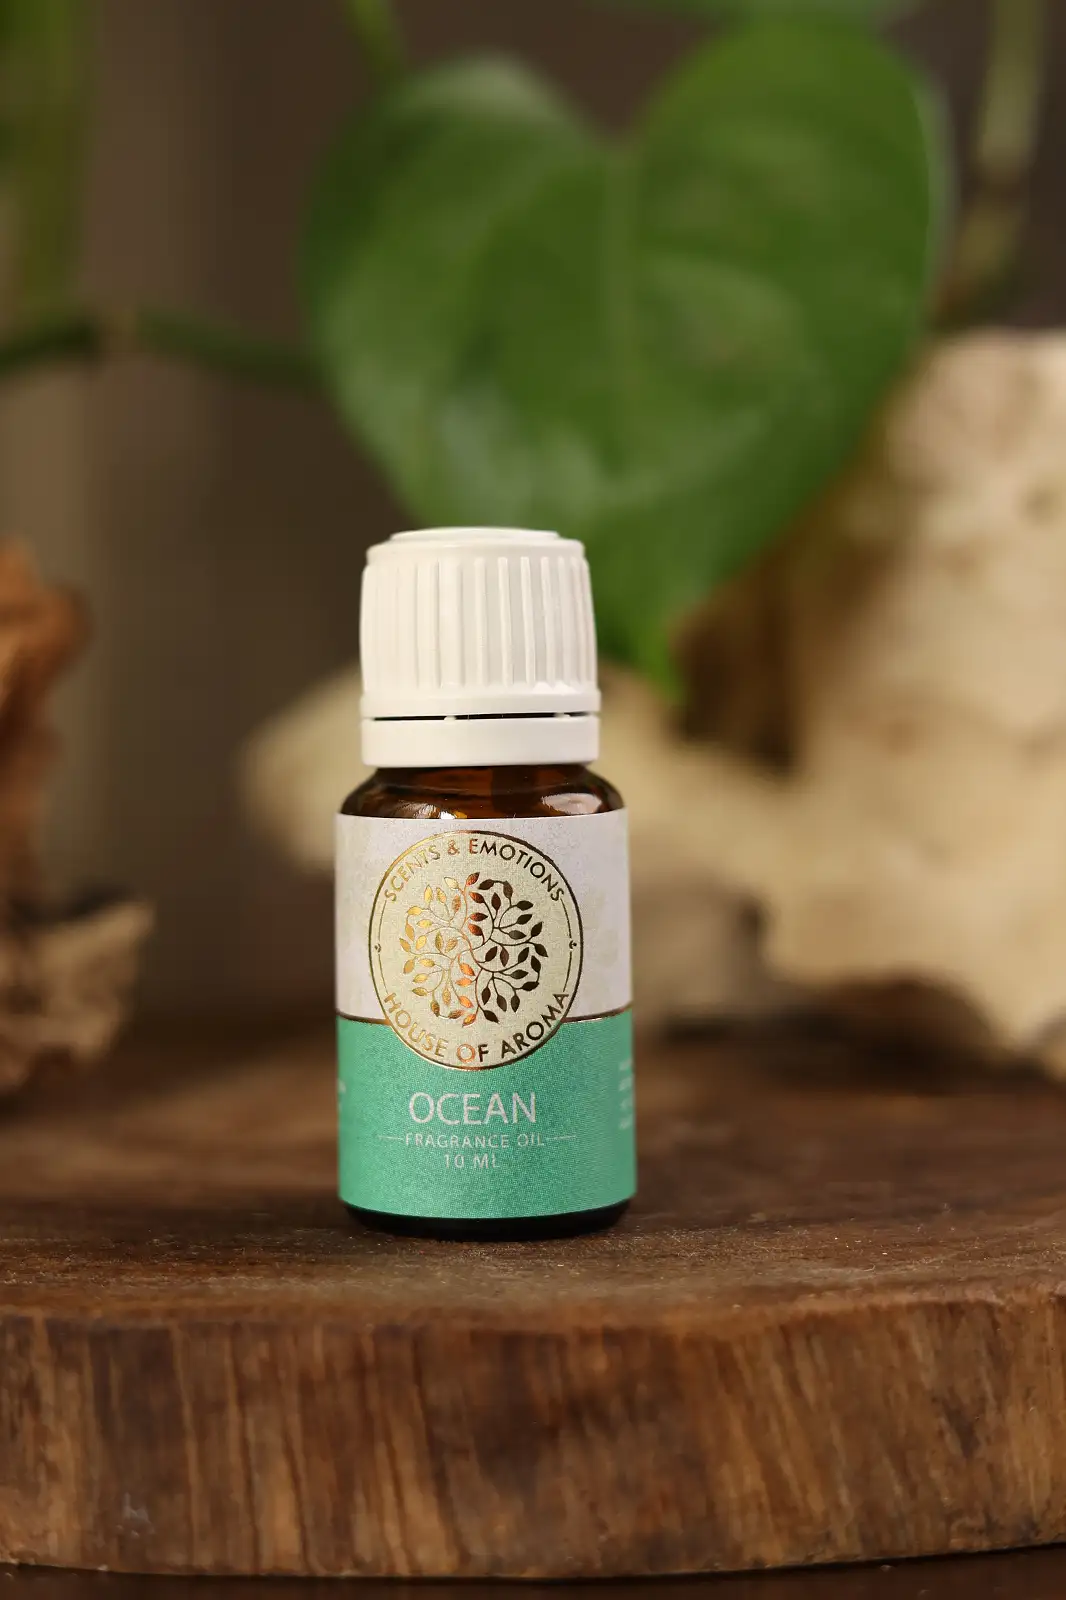 Fragrance Oil, Aroma oil, Synthetic oils, Fragrance oil for candles, oil for diffusers, Aromatic oil, Candle oil, Aromatherapy oil, oil manufacturers, House of Aroma, ocean fragrance oil, ocean breeze fragrance oil, ocean fragrance perfume, oceanic fragrance, ocean aroma oil, ocean oil benefits, ocean scented oils, ocean fresh oil